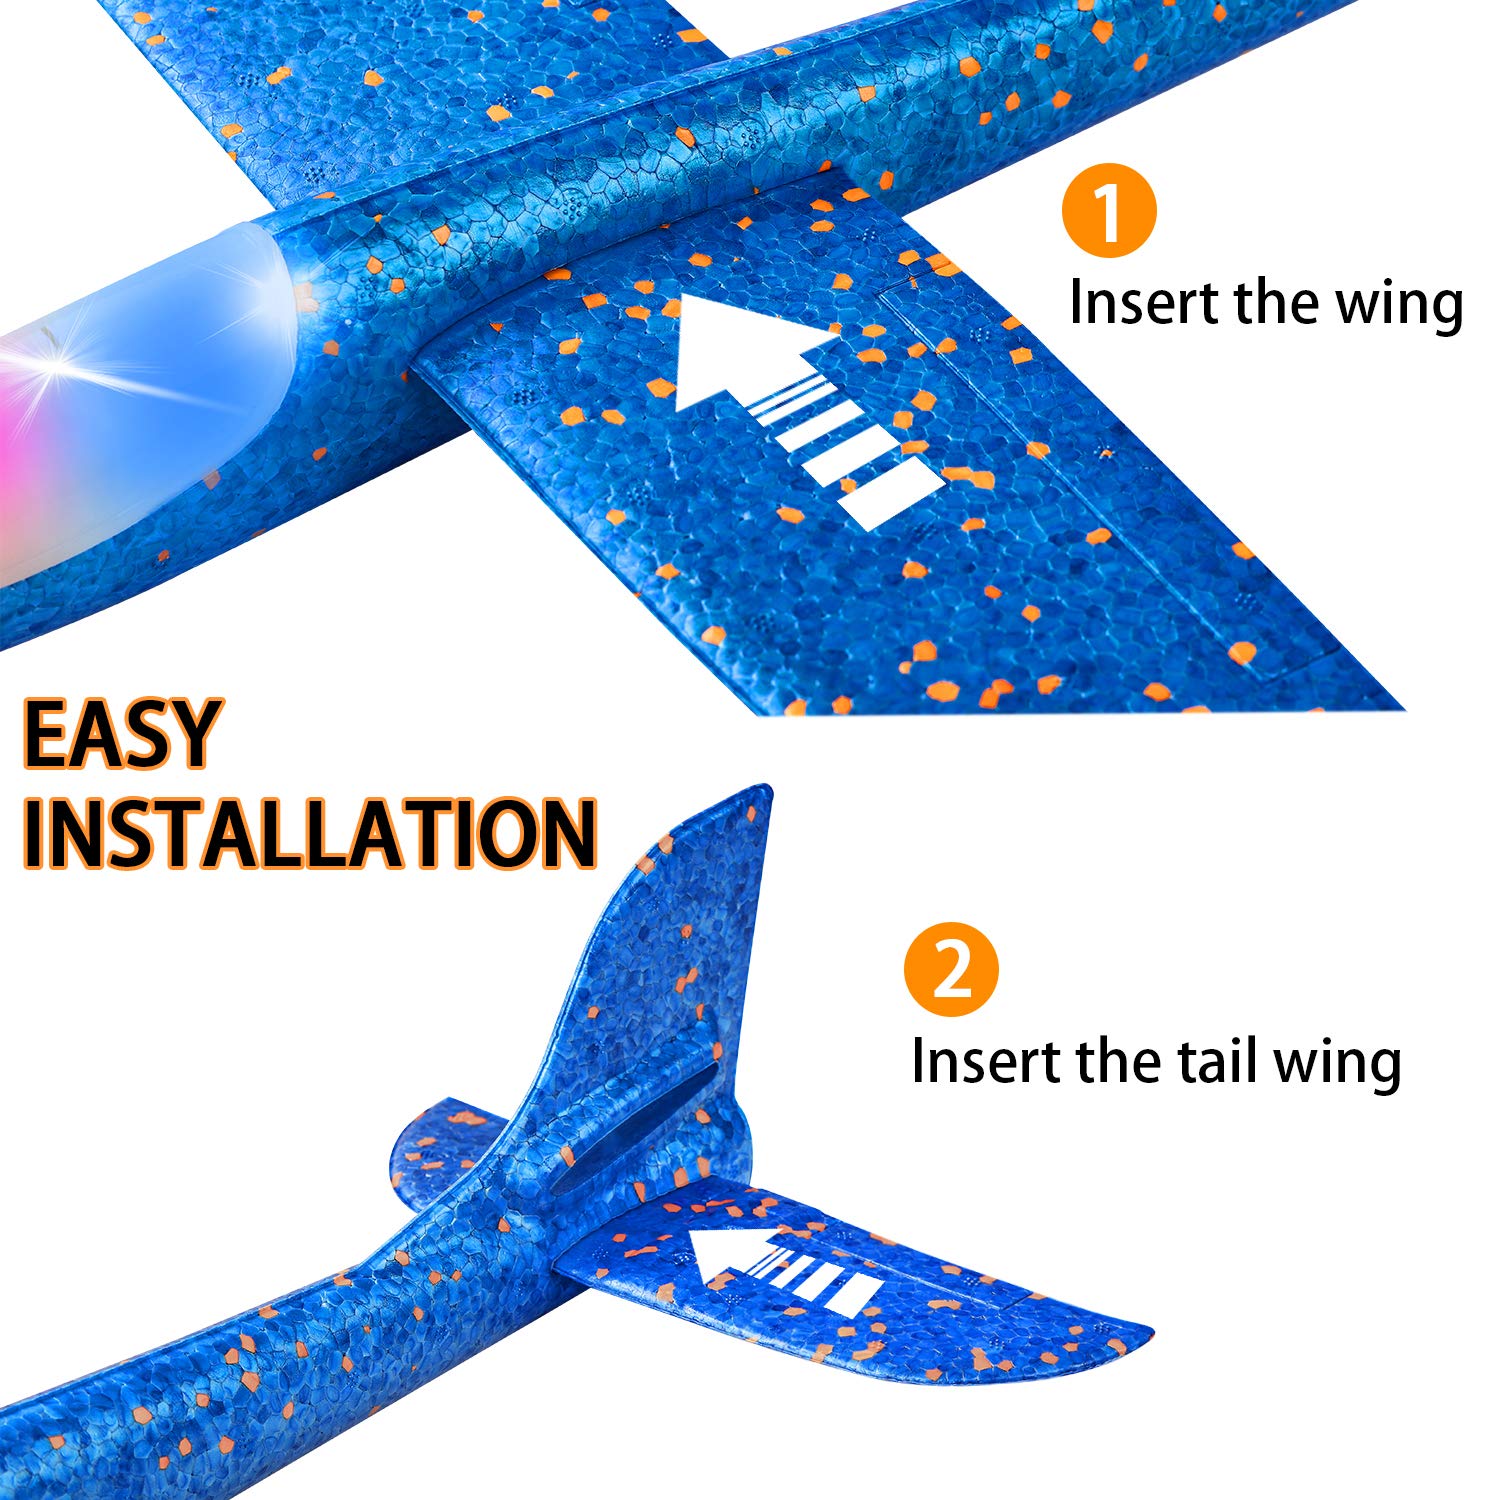 2 Pack LED Light Airplane,17.5" Large Throwing Foam Plane,2 Flight Mode Glider Plane,Flying Toy for Kids,Gifts for 3 4 5 6 7 8 9 Years Old Boy,Outdoor Sport Toys Birthday Party Favors Foam Airplane